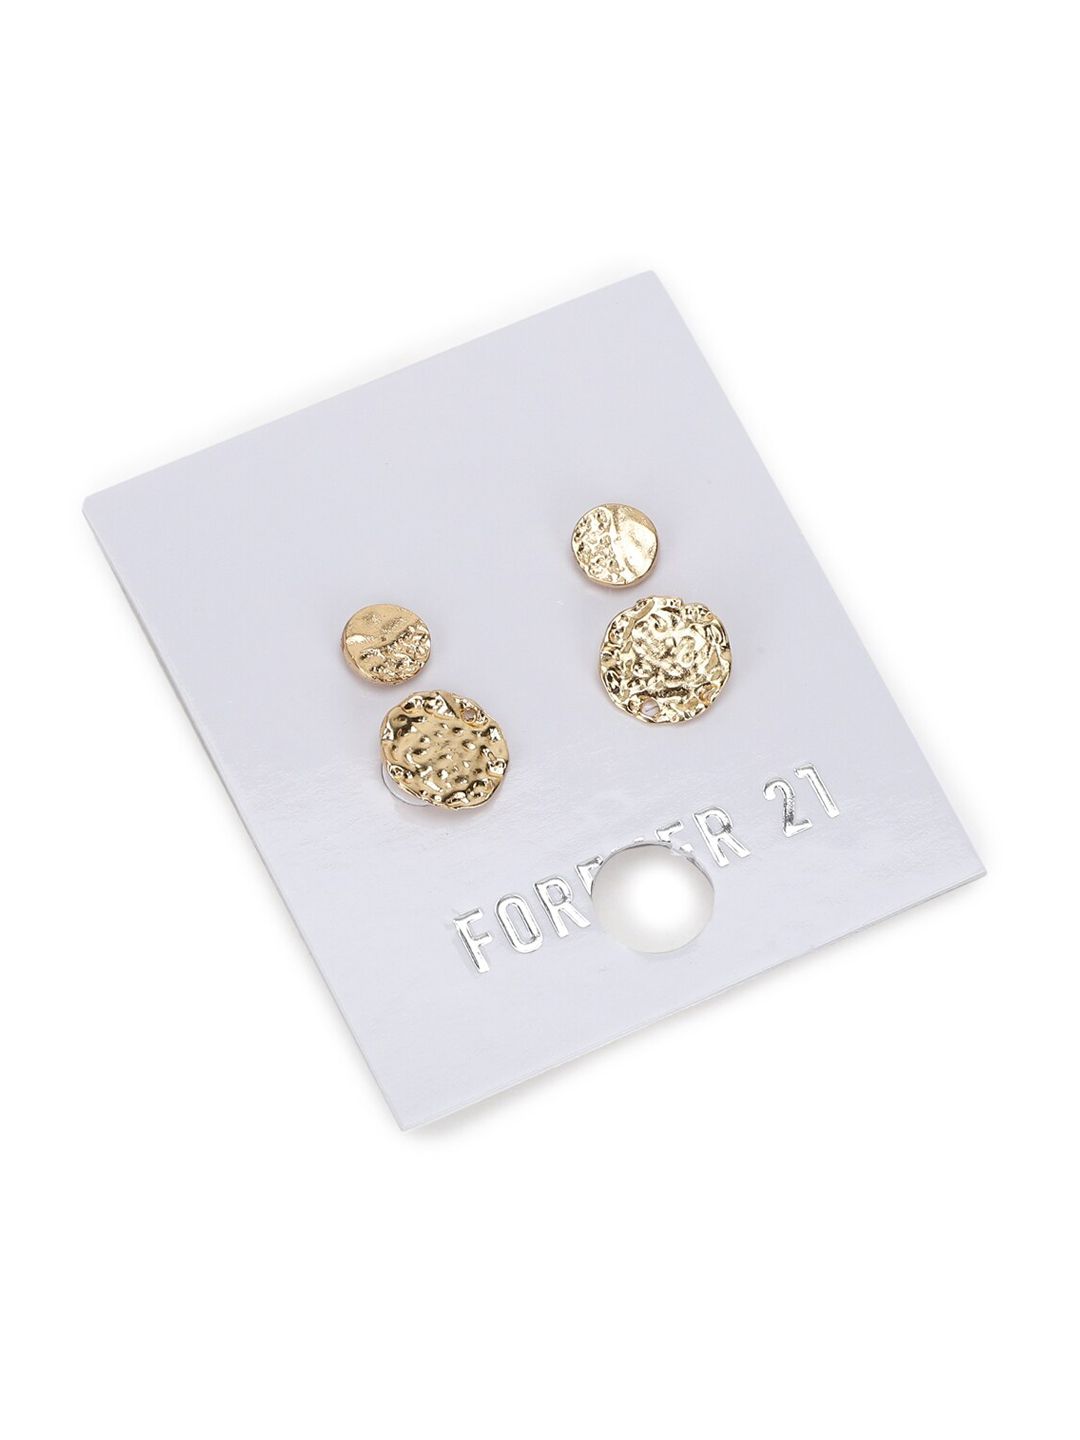 FOREVER 21 Gold-Toned Contemporary Studs Earrings Set Of 2 Price in India